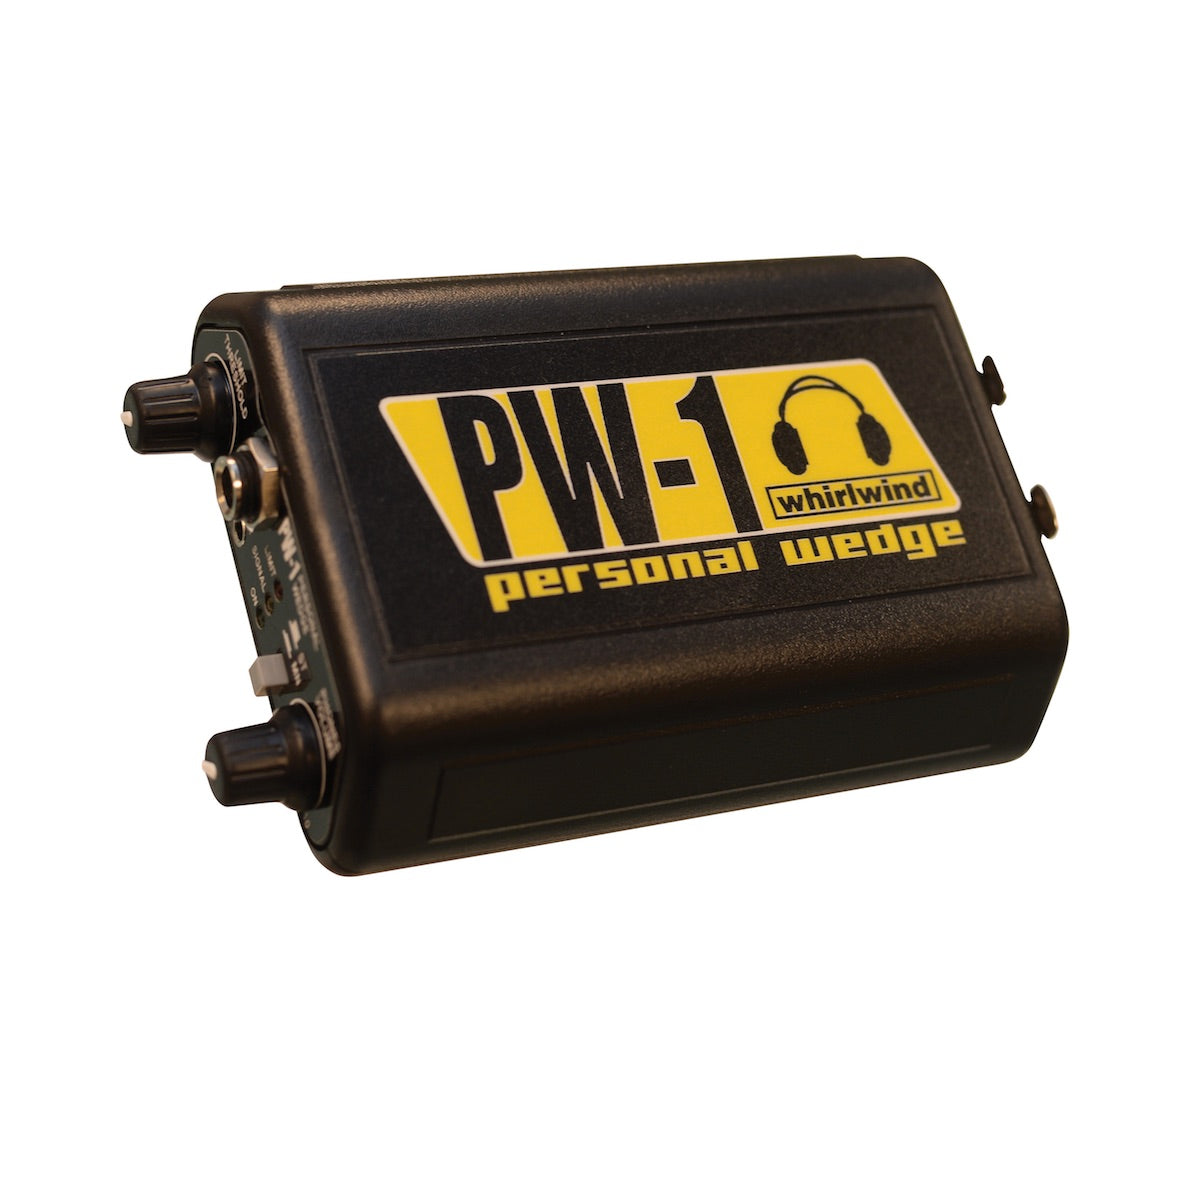 Whirlwind PW-1 Personal Wedge - High-power Stereo Headphone Driver